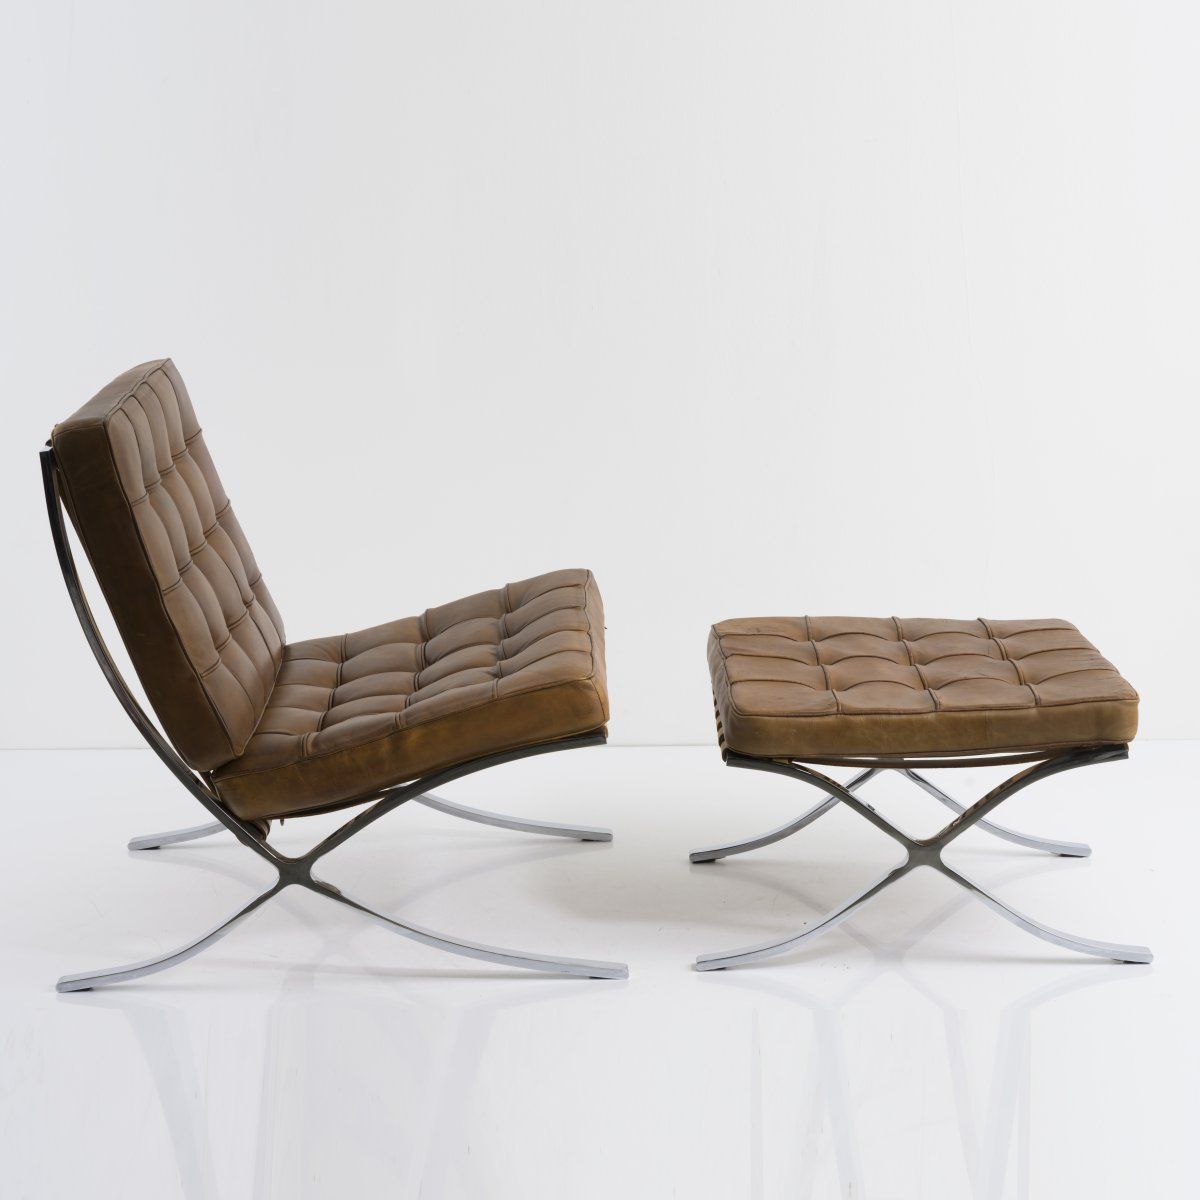 Null Ludwig Mies van der Rohe, 'Barcelona chair' con pouf, 1929, Lounge chair: H&hellip;